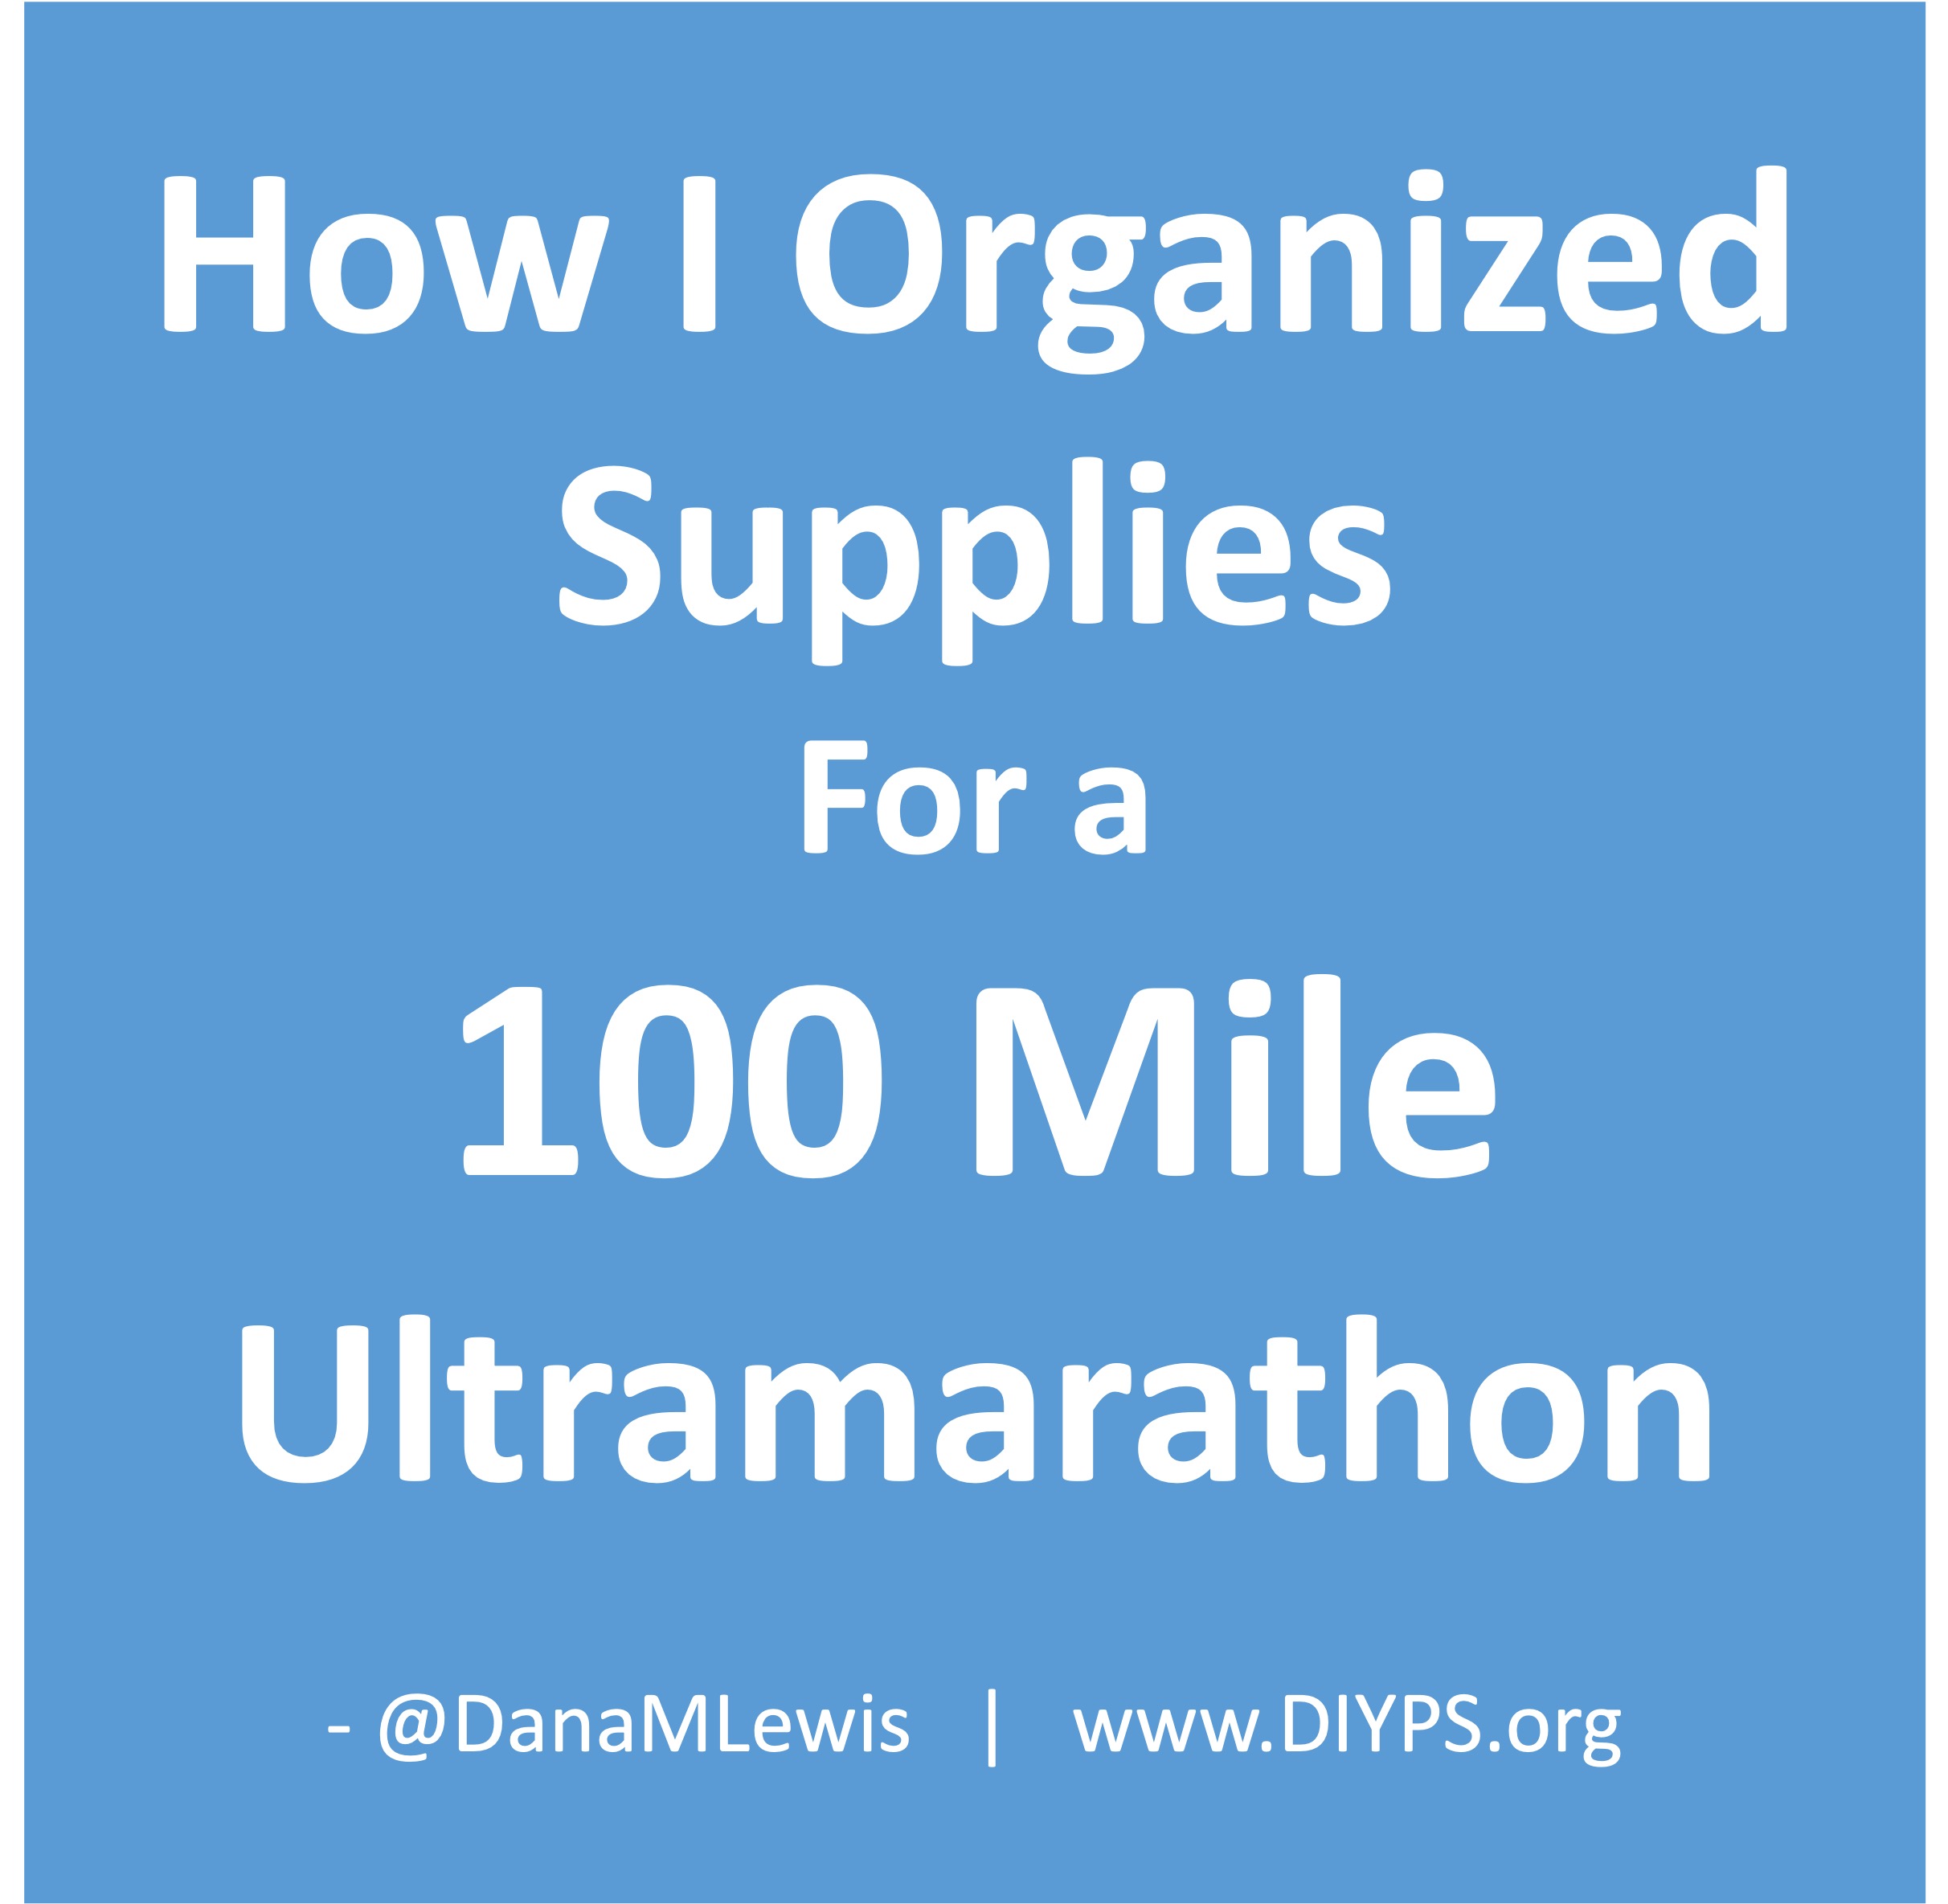 How I Organized Supplies for a 100 mile (or similarly long) ultramarathon